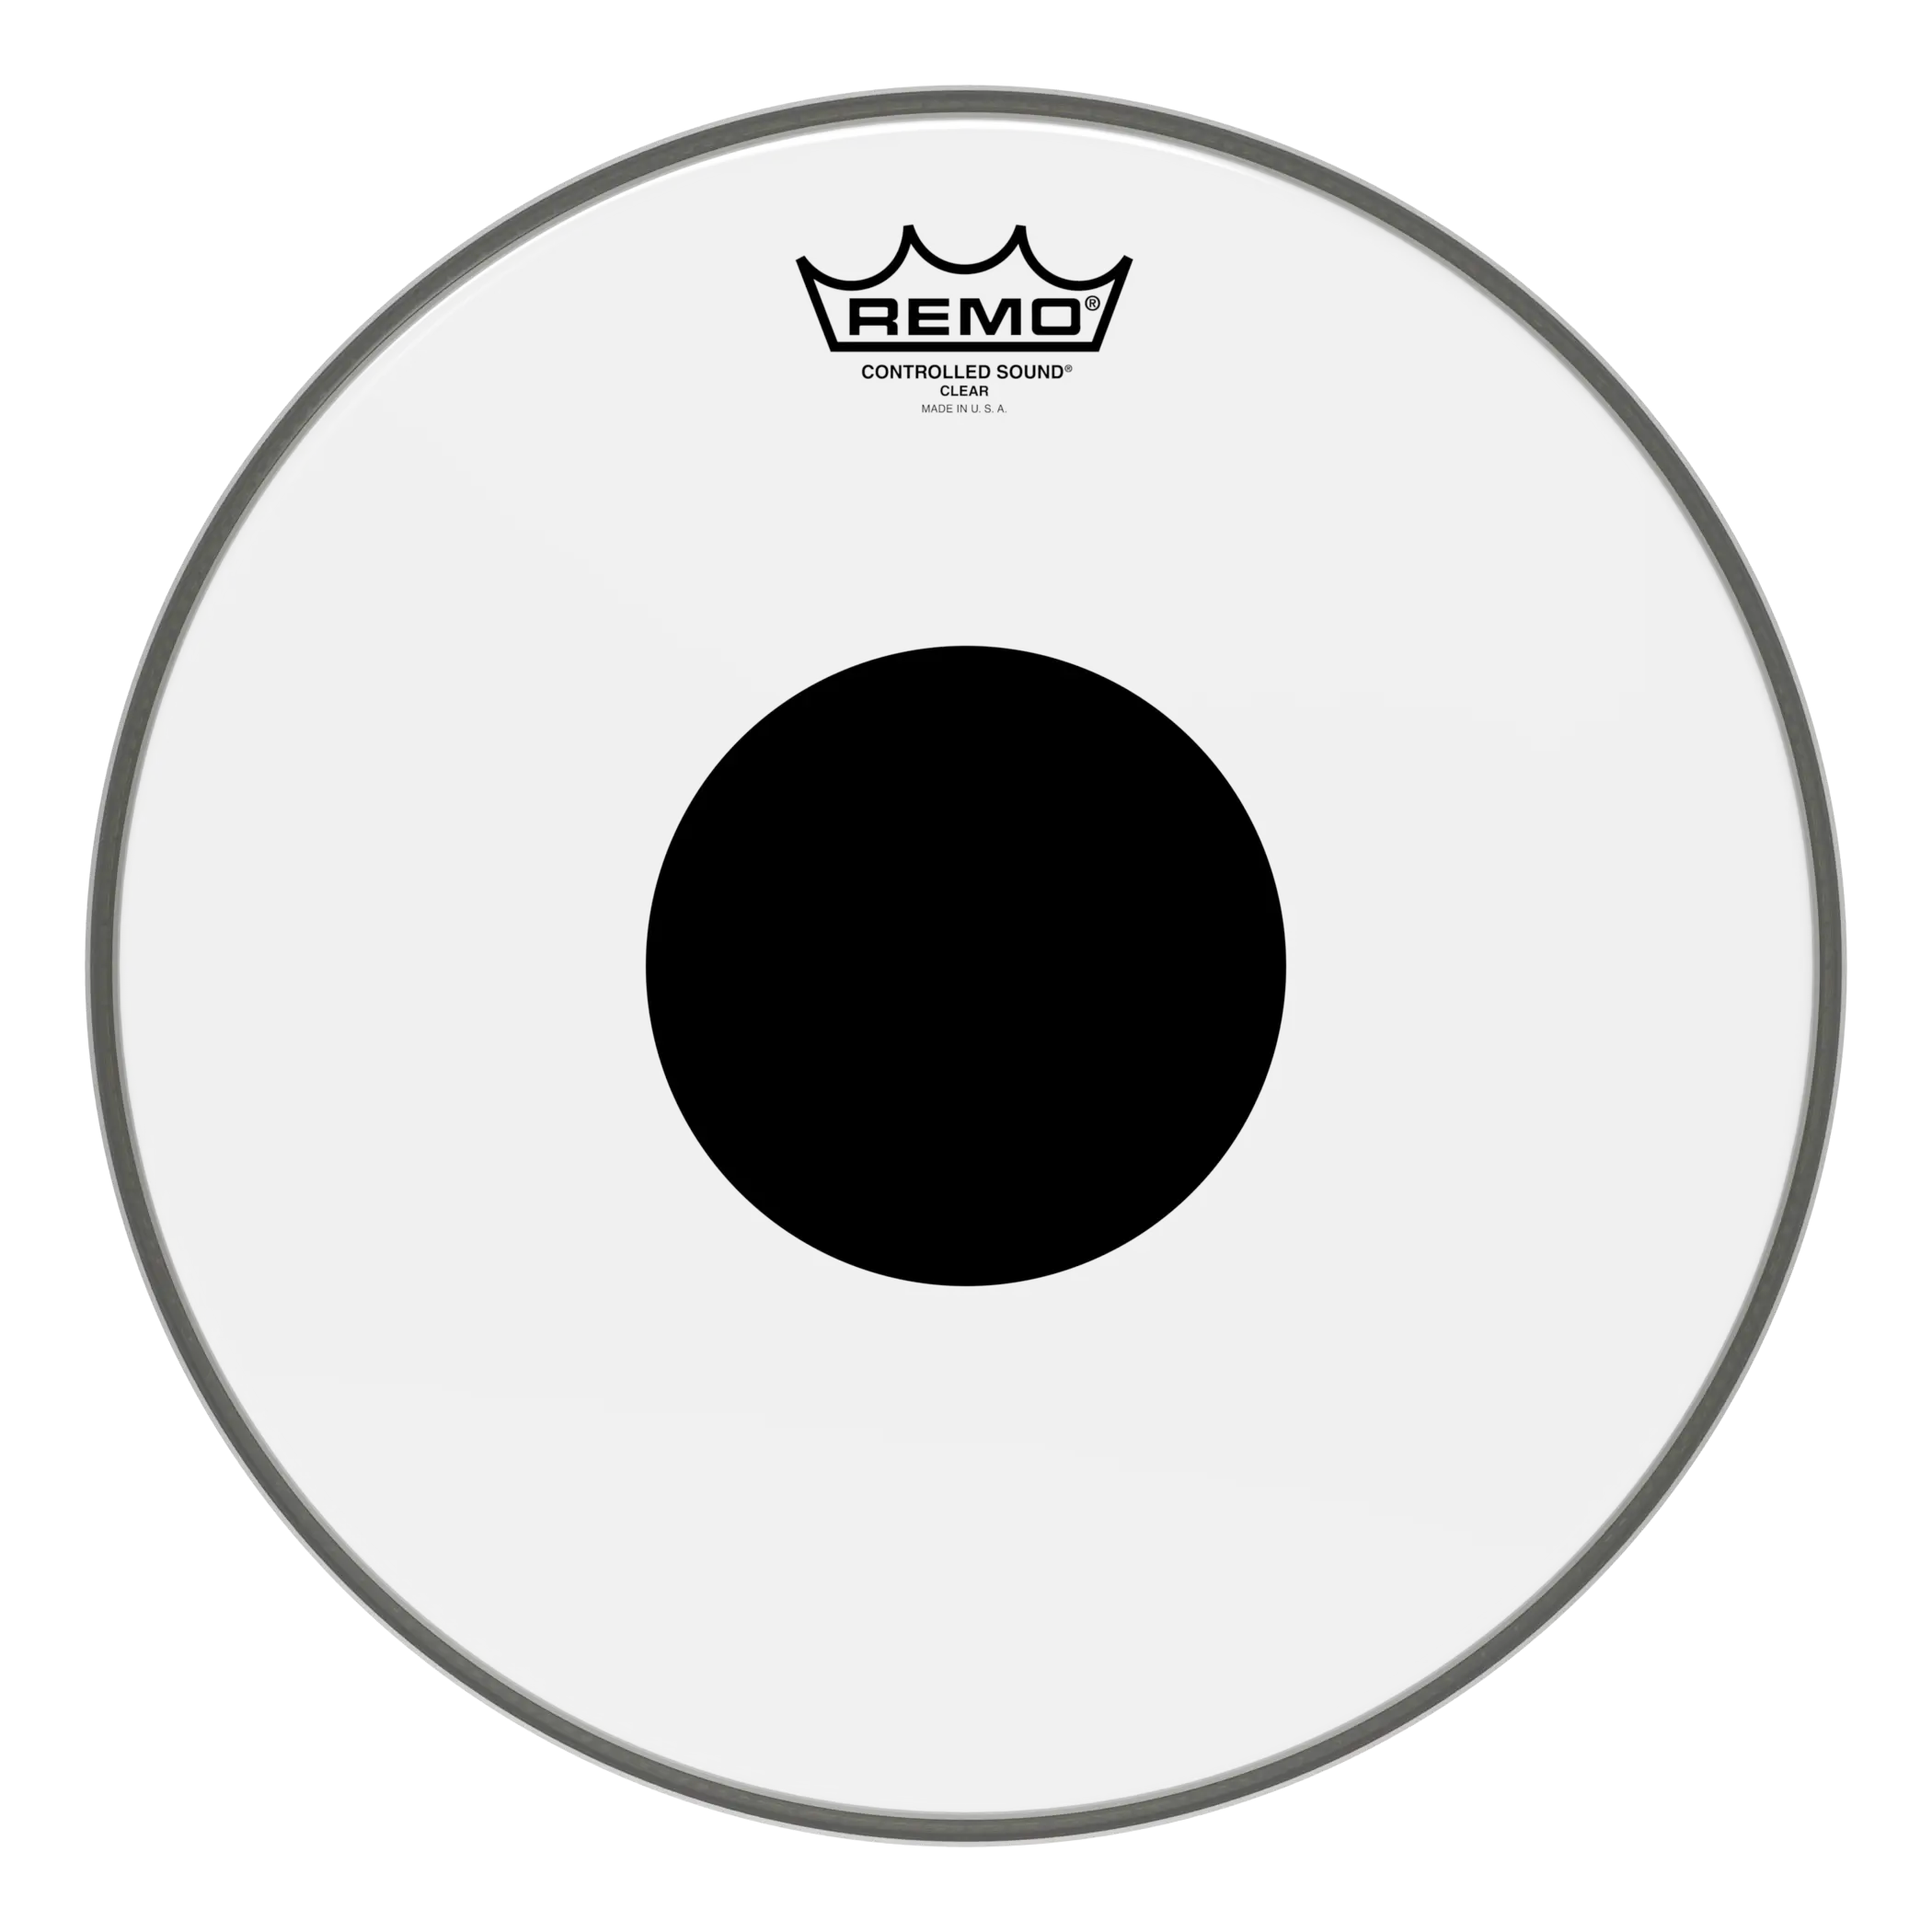 Remo 13" Controlled Sound Black Dot Clear Drumhead